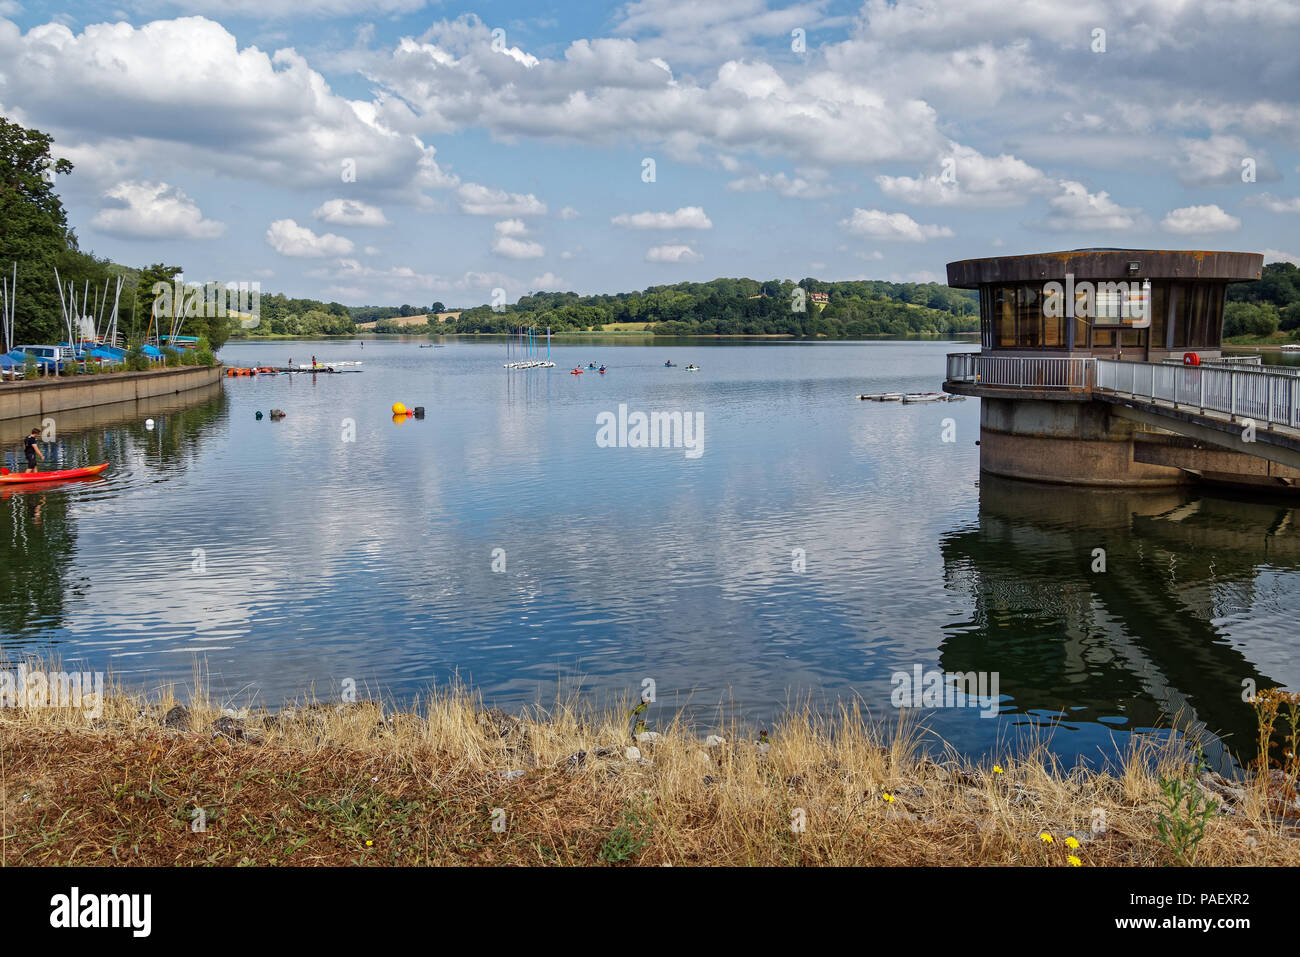 ARDINGLY, SUSSEX/UK - JULY 21 : View of the reservoir in Ardingly Sussex on July 21, 2018. Unidentified people Stock Photo